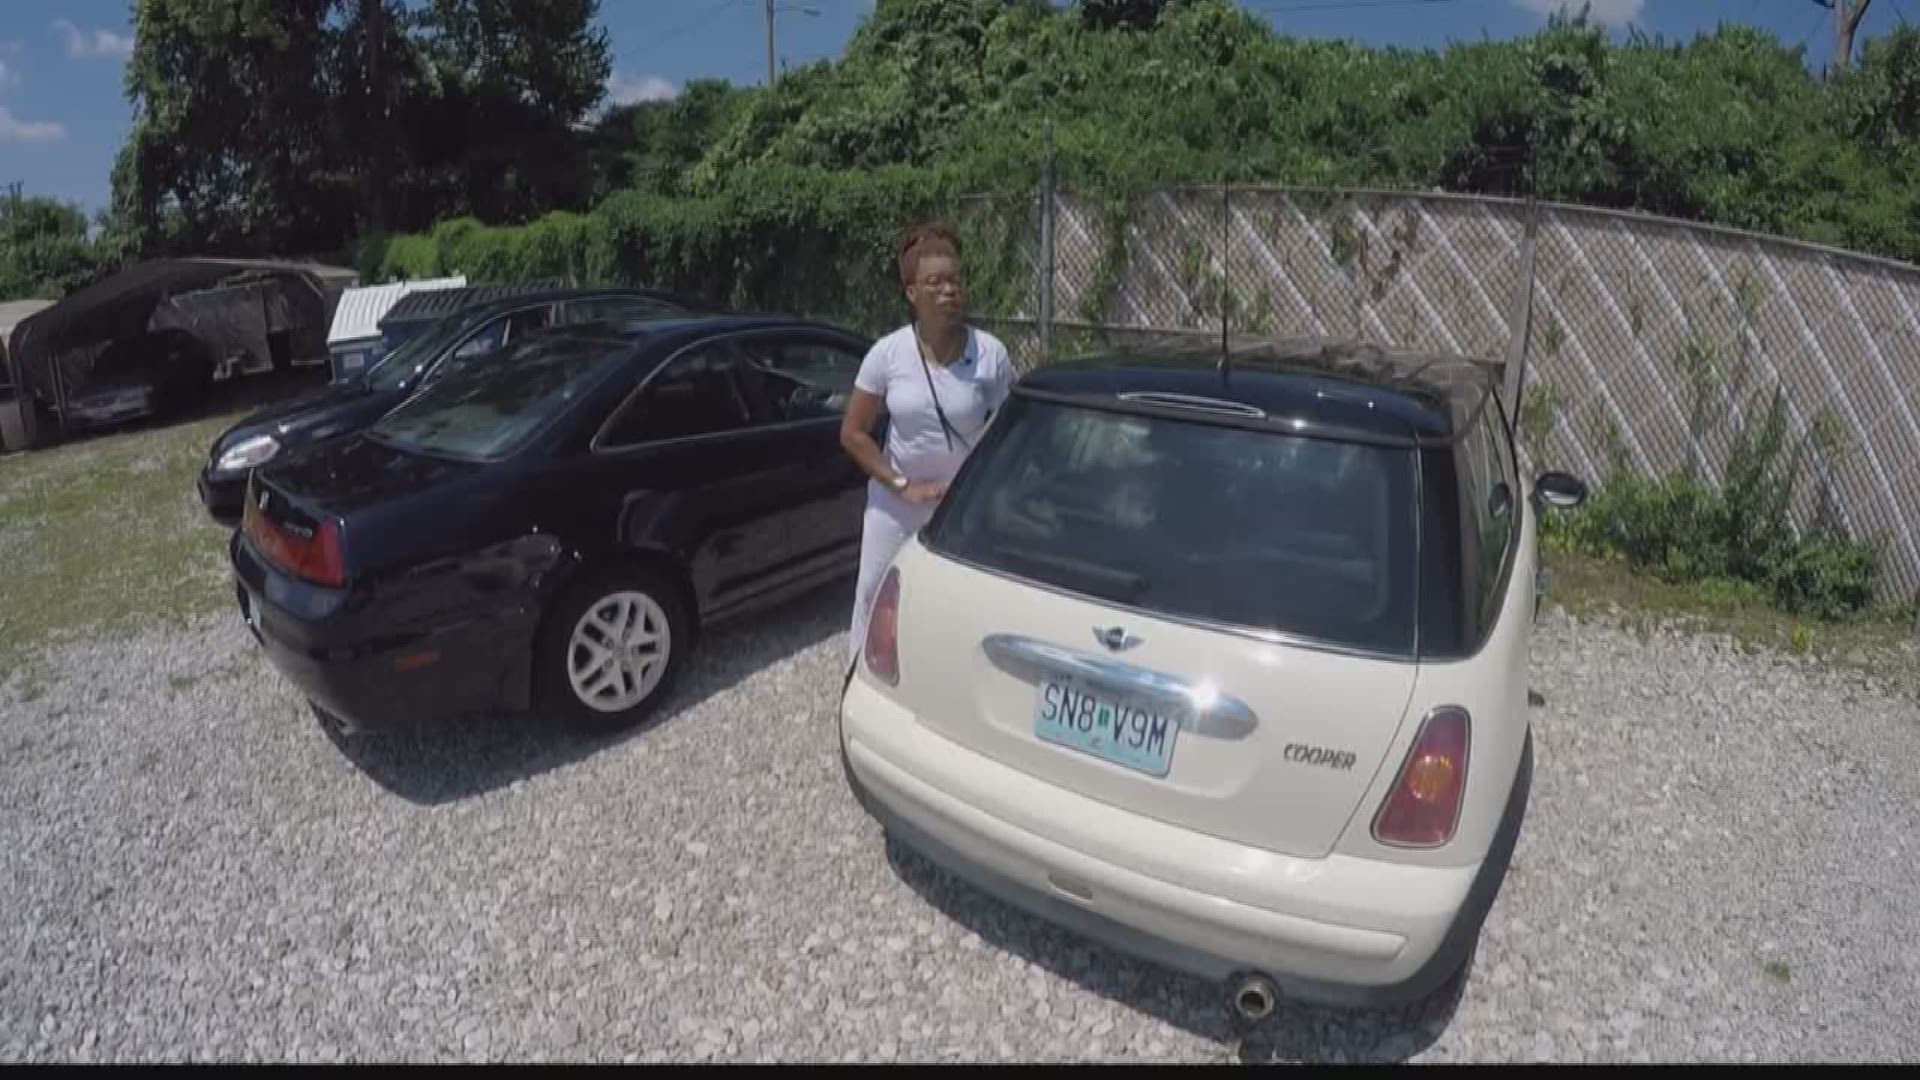 One St. Louis woman says she got more than she deserved when the city of st. Louis towed her vehicle.